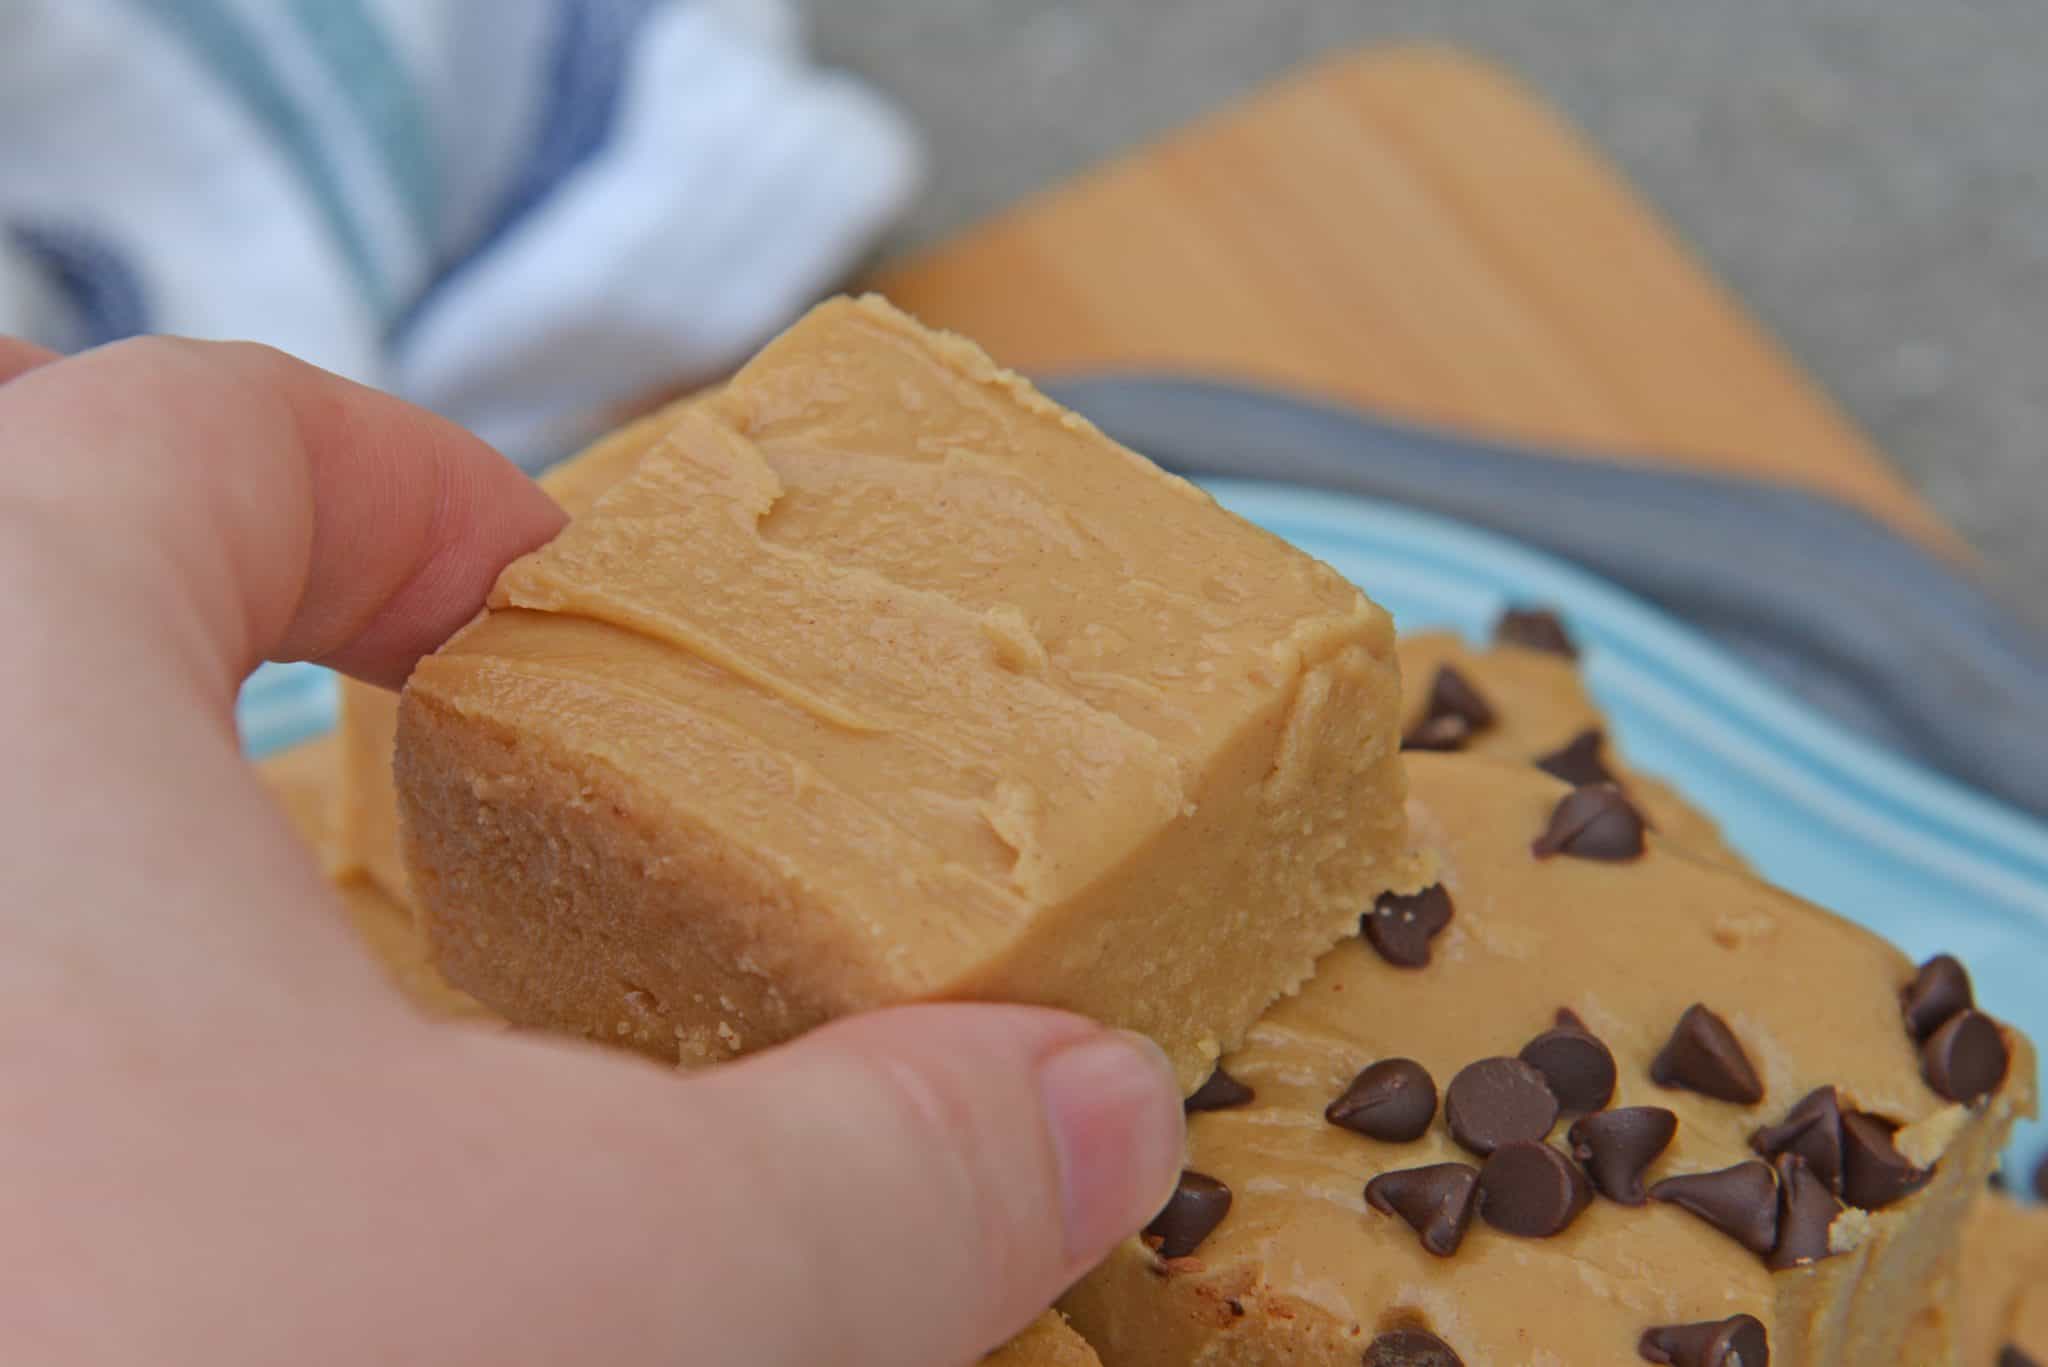 Easy Peanut Butter Fudge is rich, decadent and perfectly creamy. Simple instructions for how to make fudge in just 10 minutes! #peanutbutterfudge #easyfudge #fudge www.savoryexperiments.com 